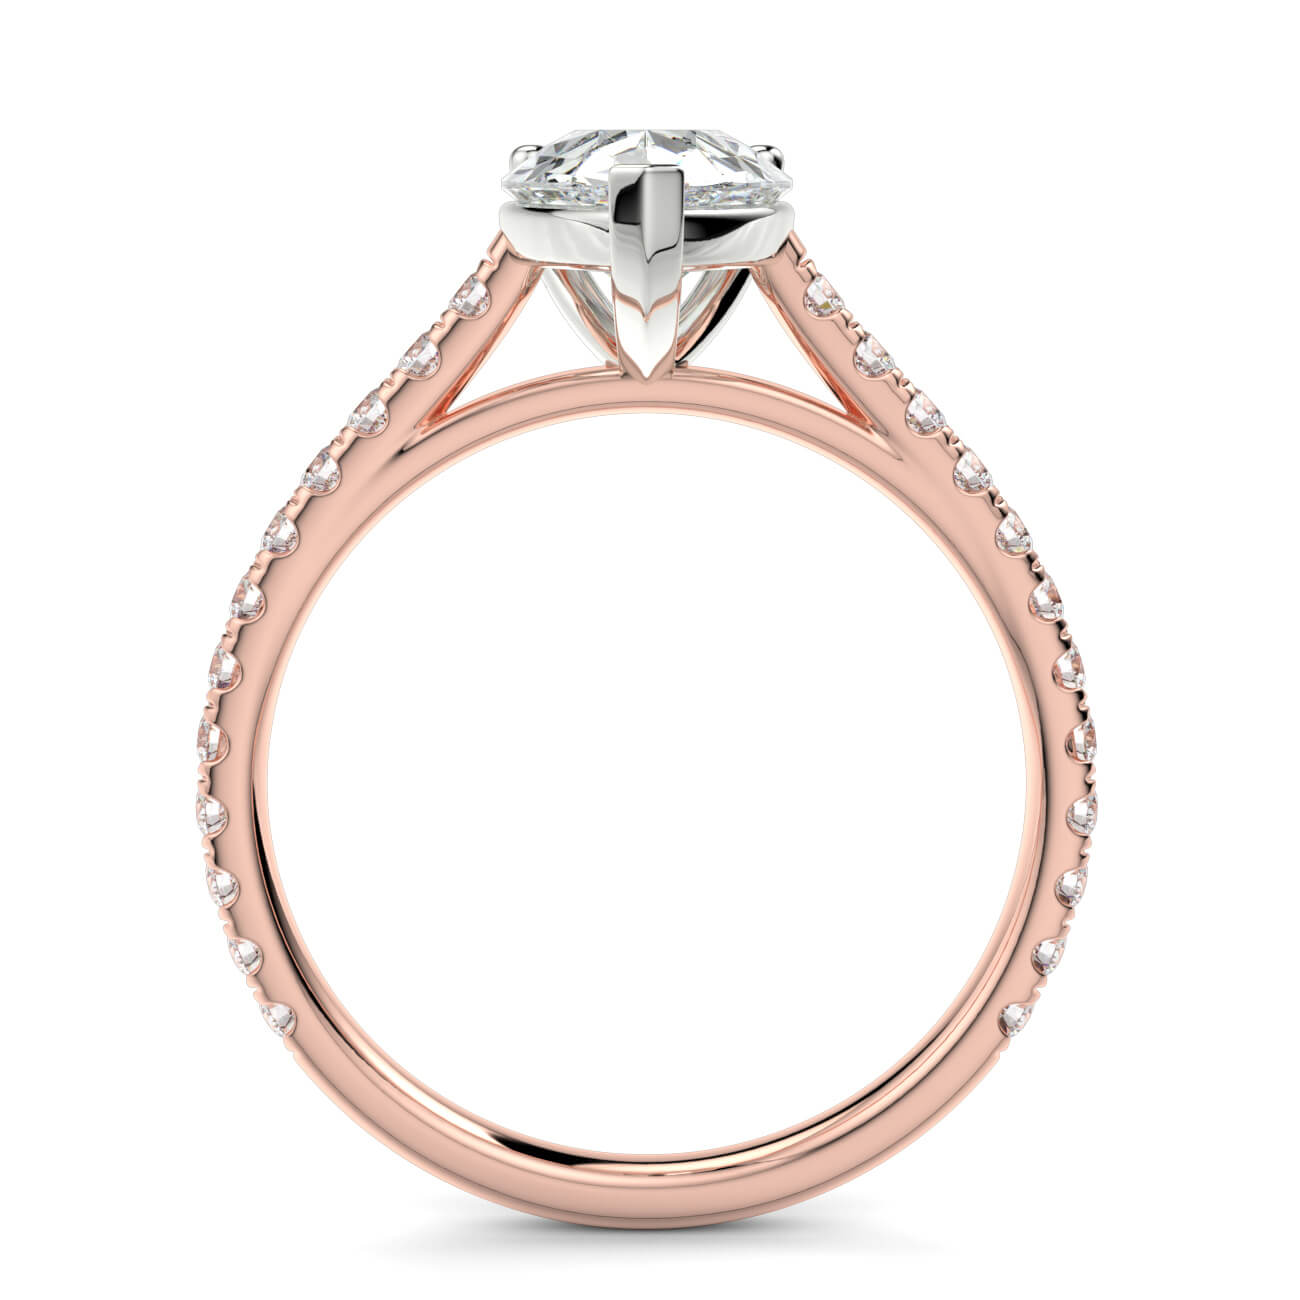 Pear shape diamond cathedral engagement ring in rose and white gold – Australian Diamond Network